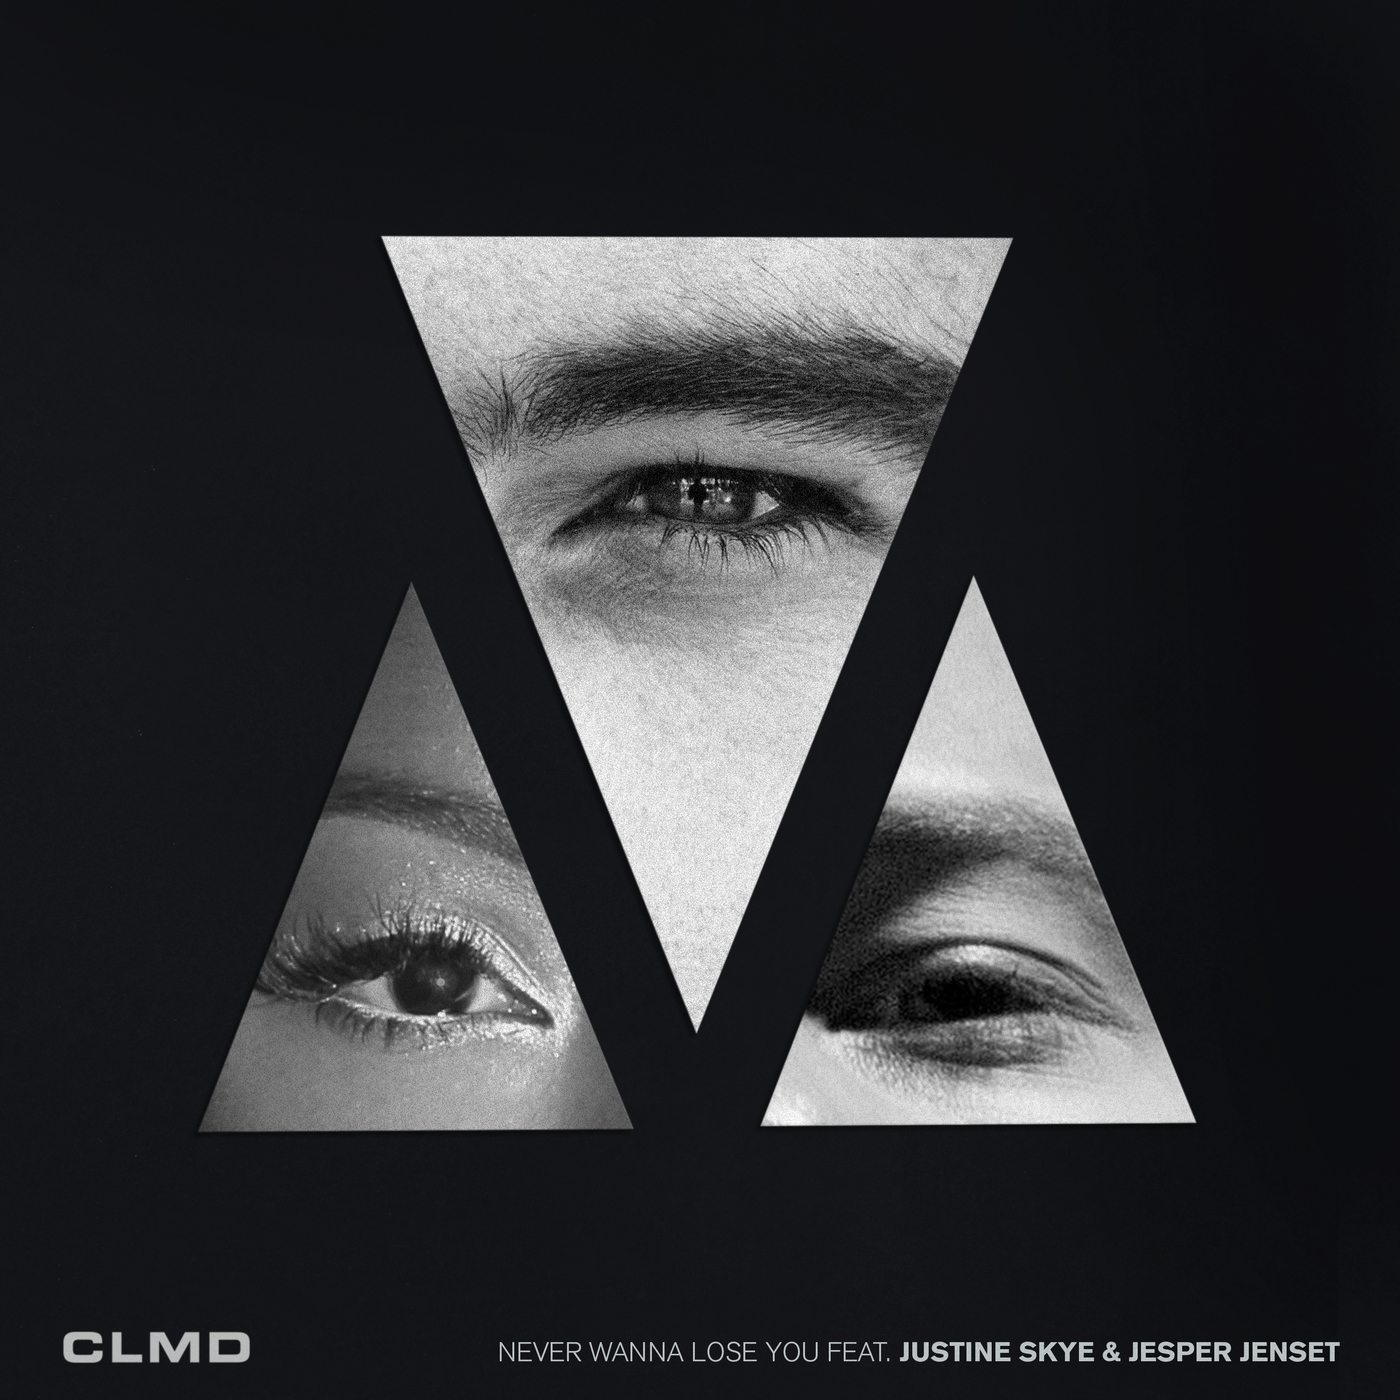 CLMD–"Never Wanna Lose You"